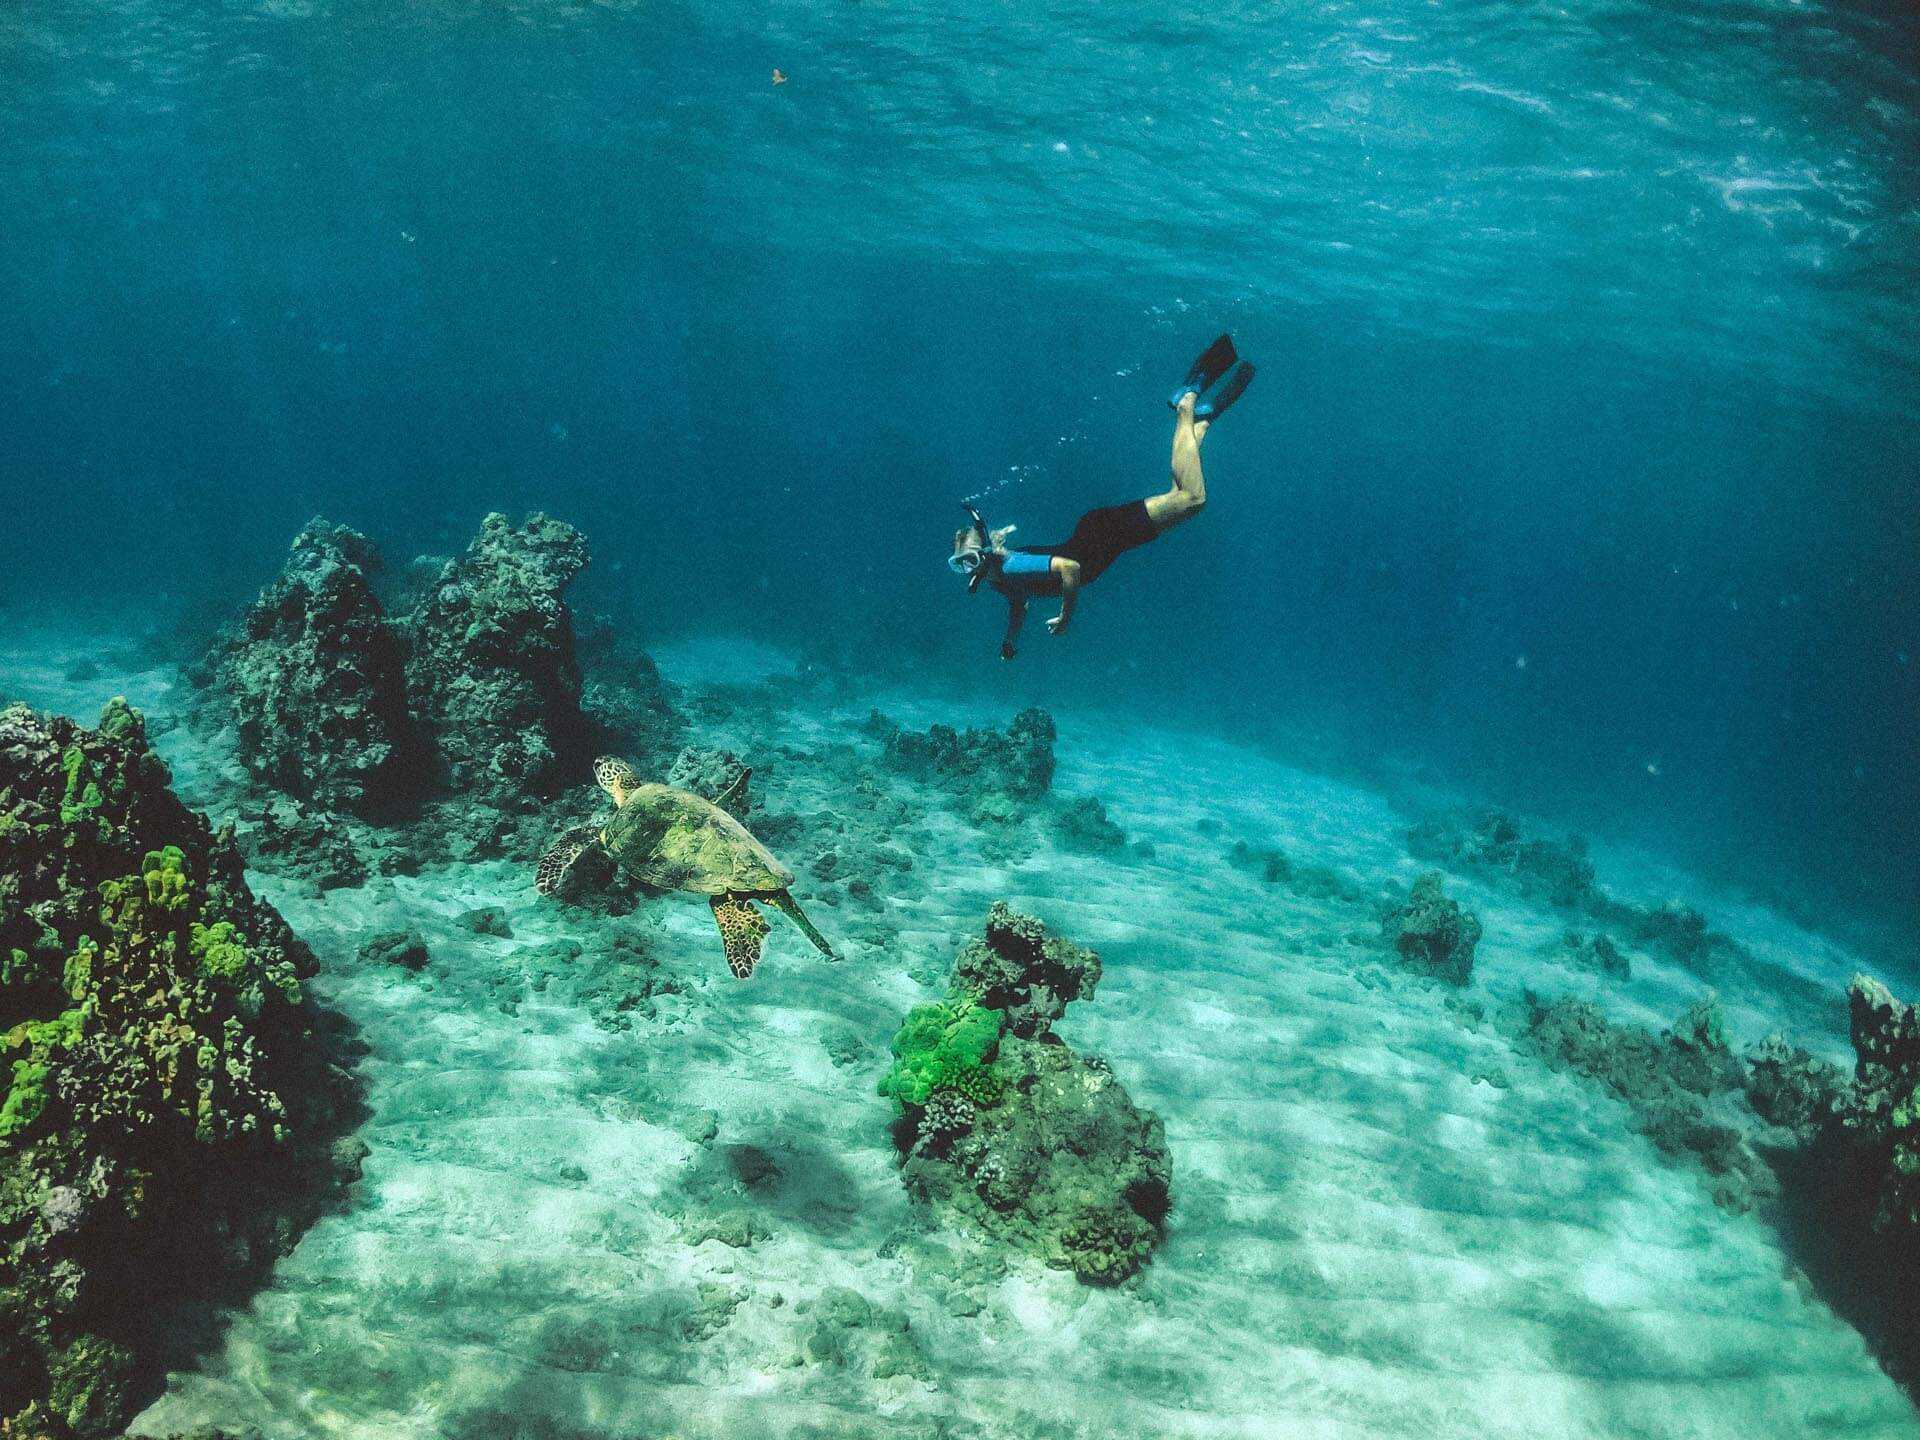 A snorkeler dives underwater to explore the shallows off Hawaii's Maui coast